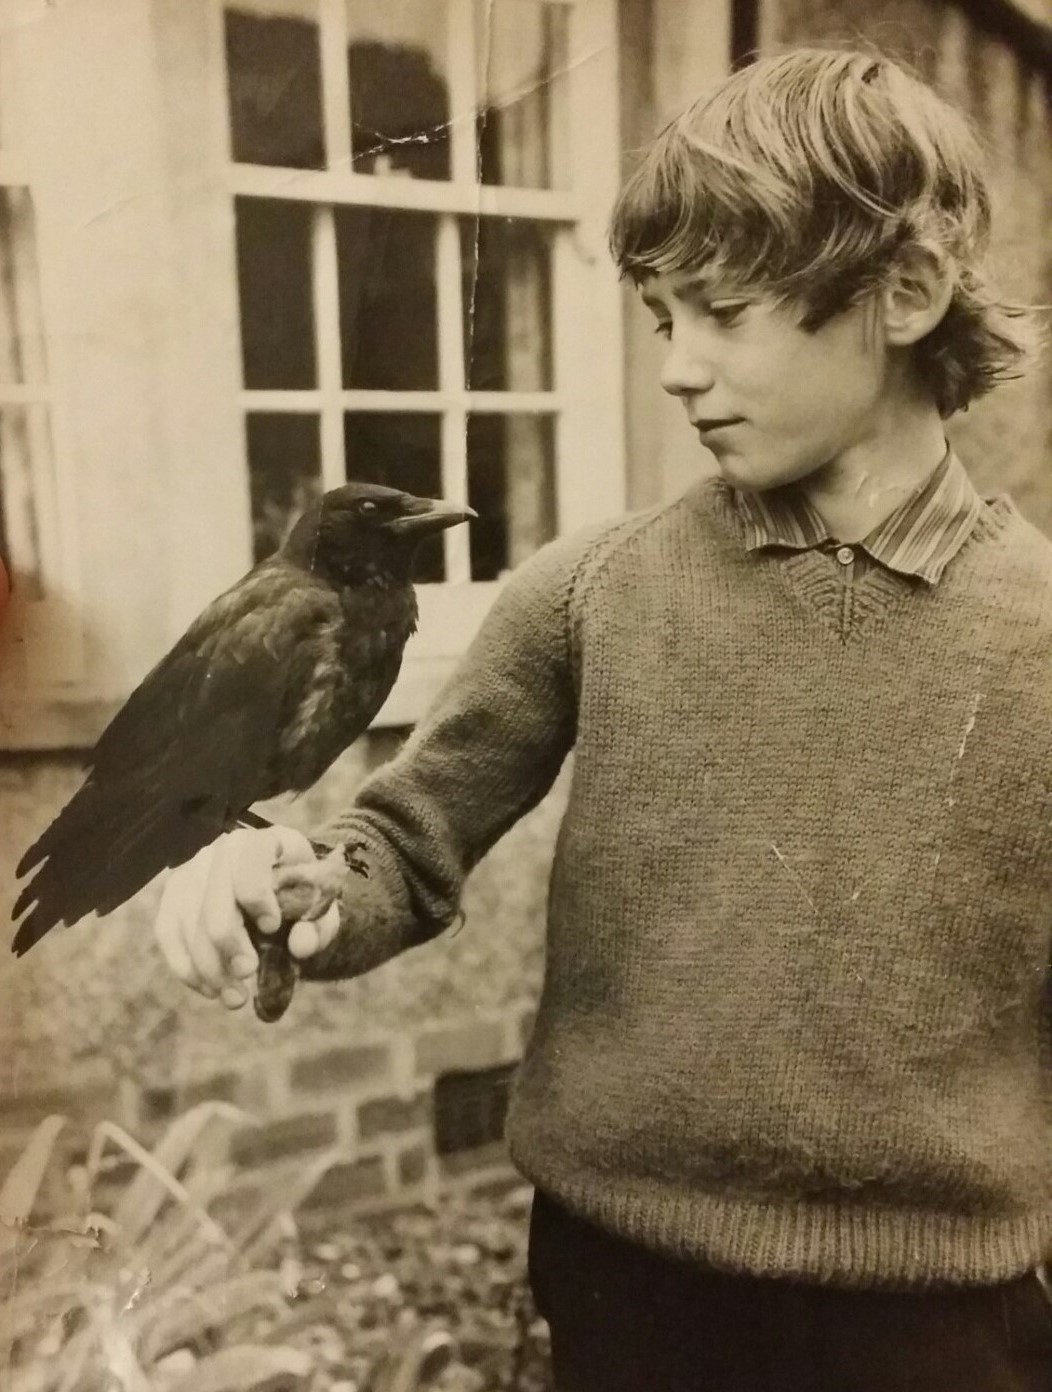 coolkidsofhistory: “ “My dad with his pet crow in the 1970s.” ”